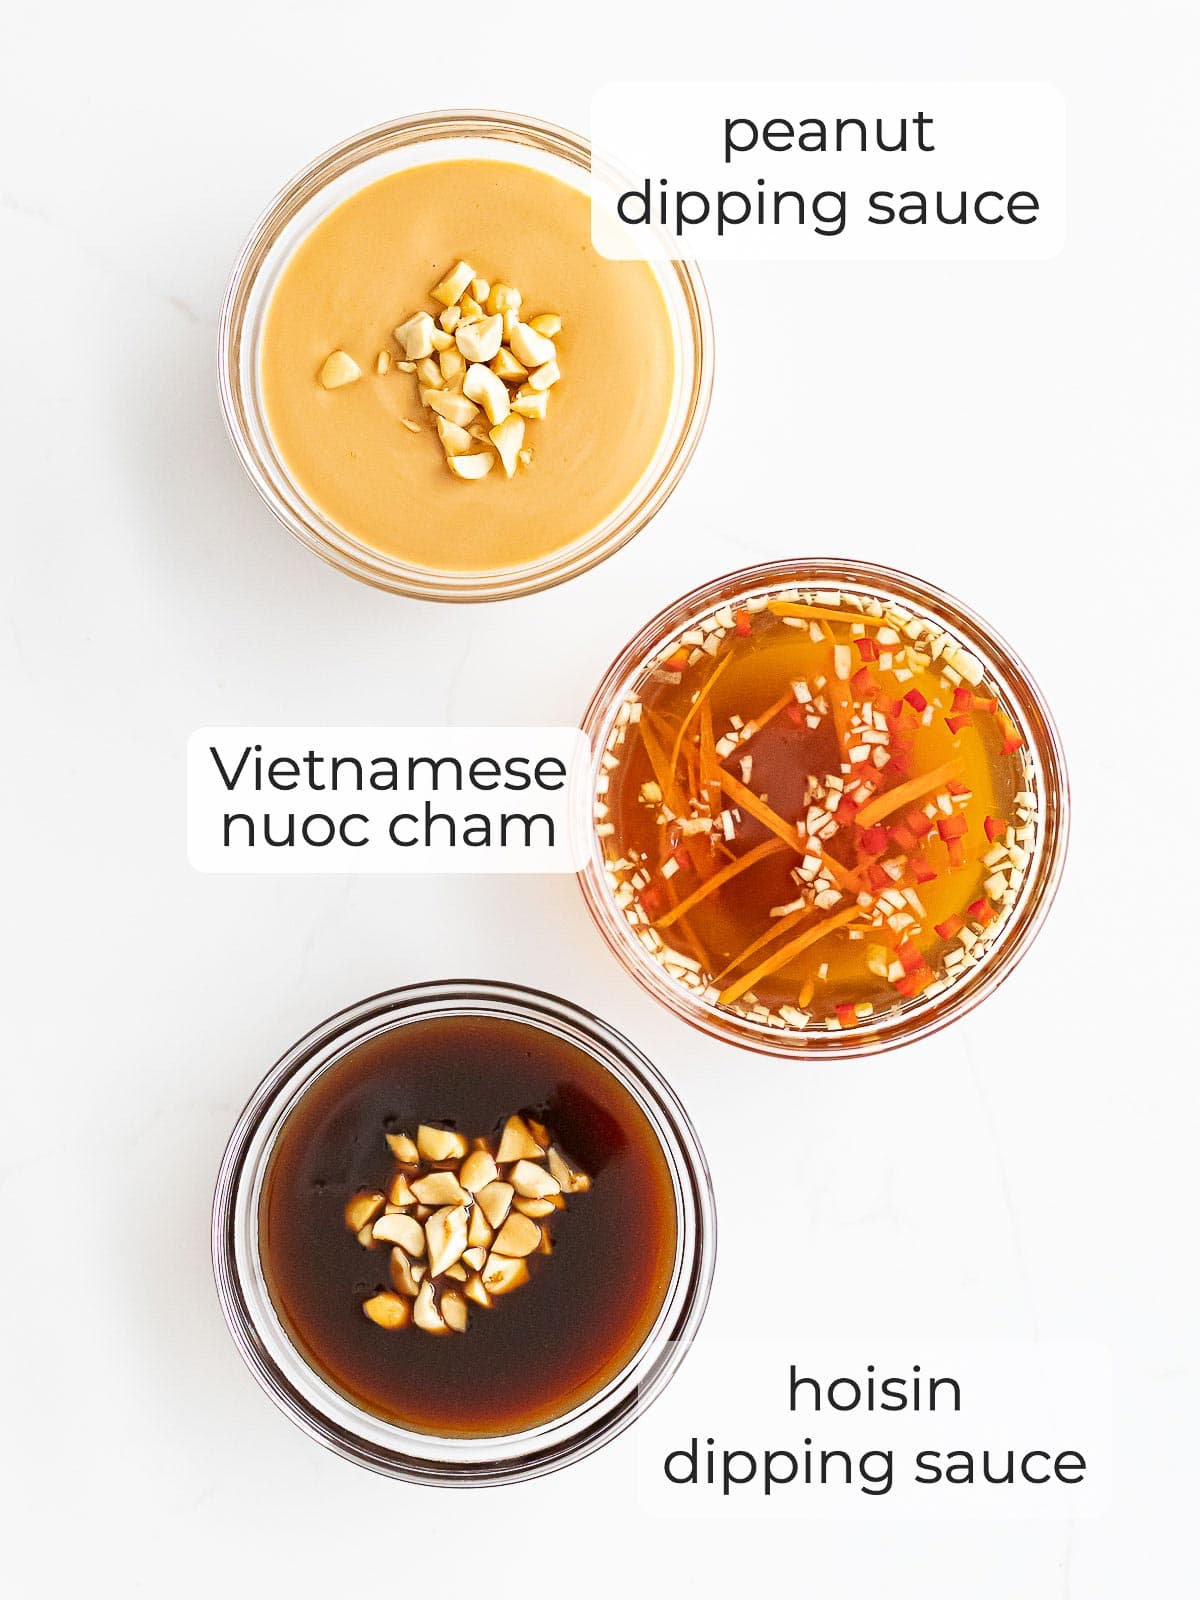 three varieties of spring roll dipping sauces including peanut, hoisin, and nuoc cham sauce